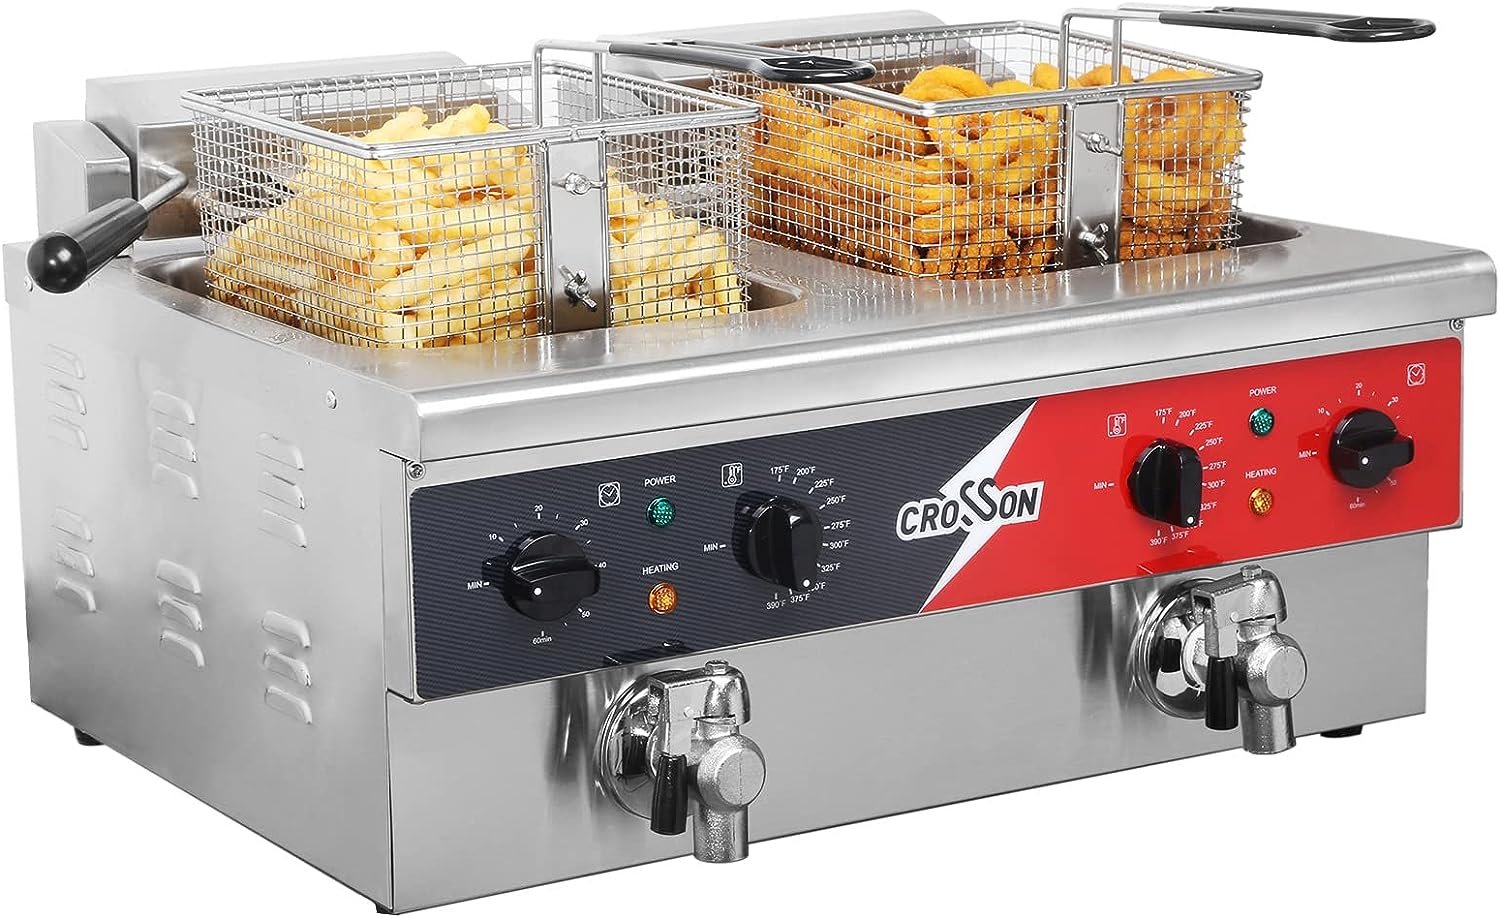 CROSSON 12L Dual Tank Countertop Electric Deep Fryer with Drain,Solid Basket and Lid for Restaurant and Home Use 120V,3600W Stainless Steel Commercial Deep Fryer (EF-6V-2)